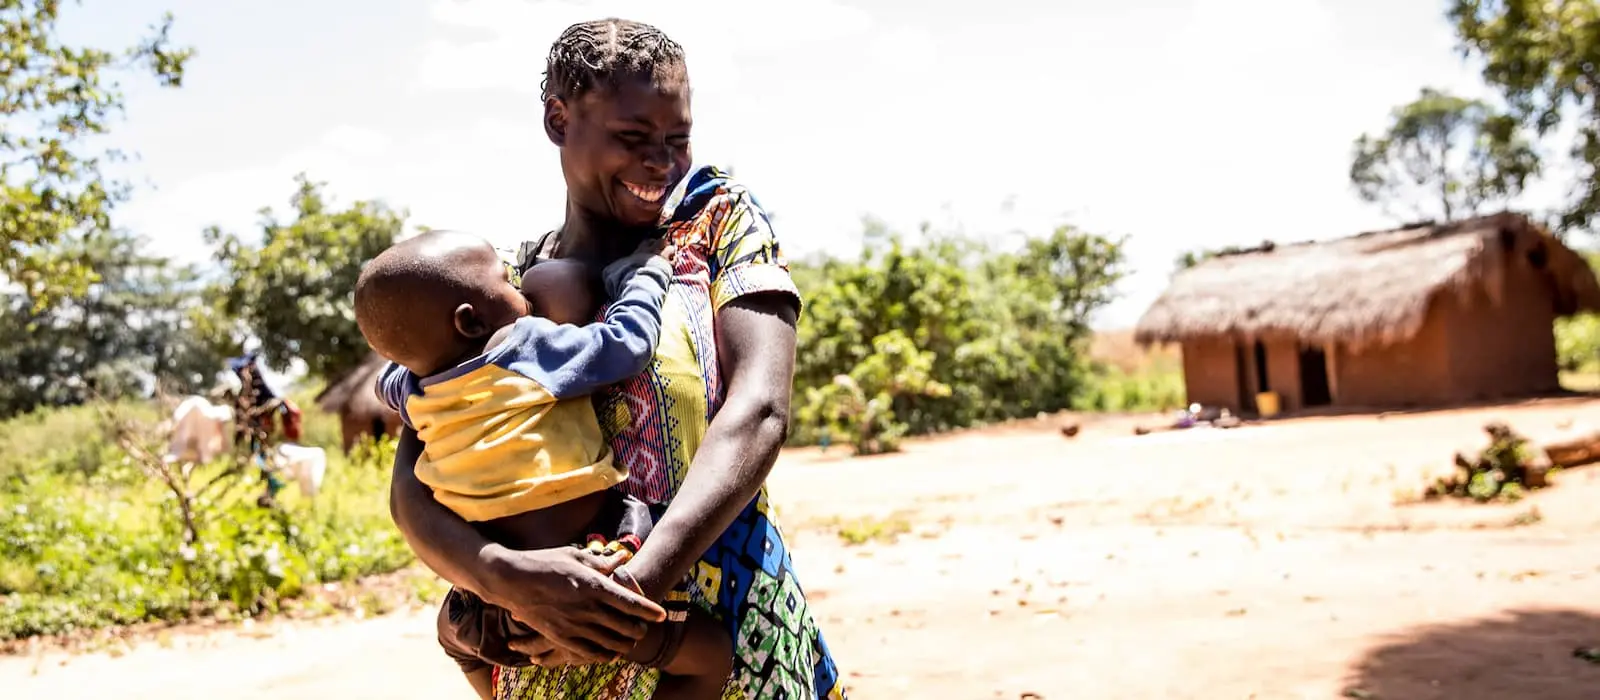 Natalie Ngoyi, 20, is seen at home with her 1 year old baby, Adere, in the town of Pension, Manono Territory.